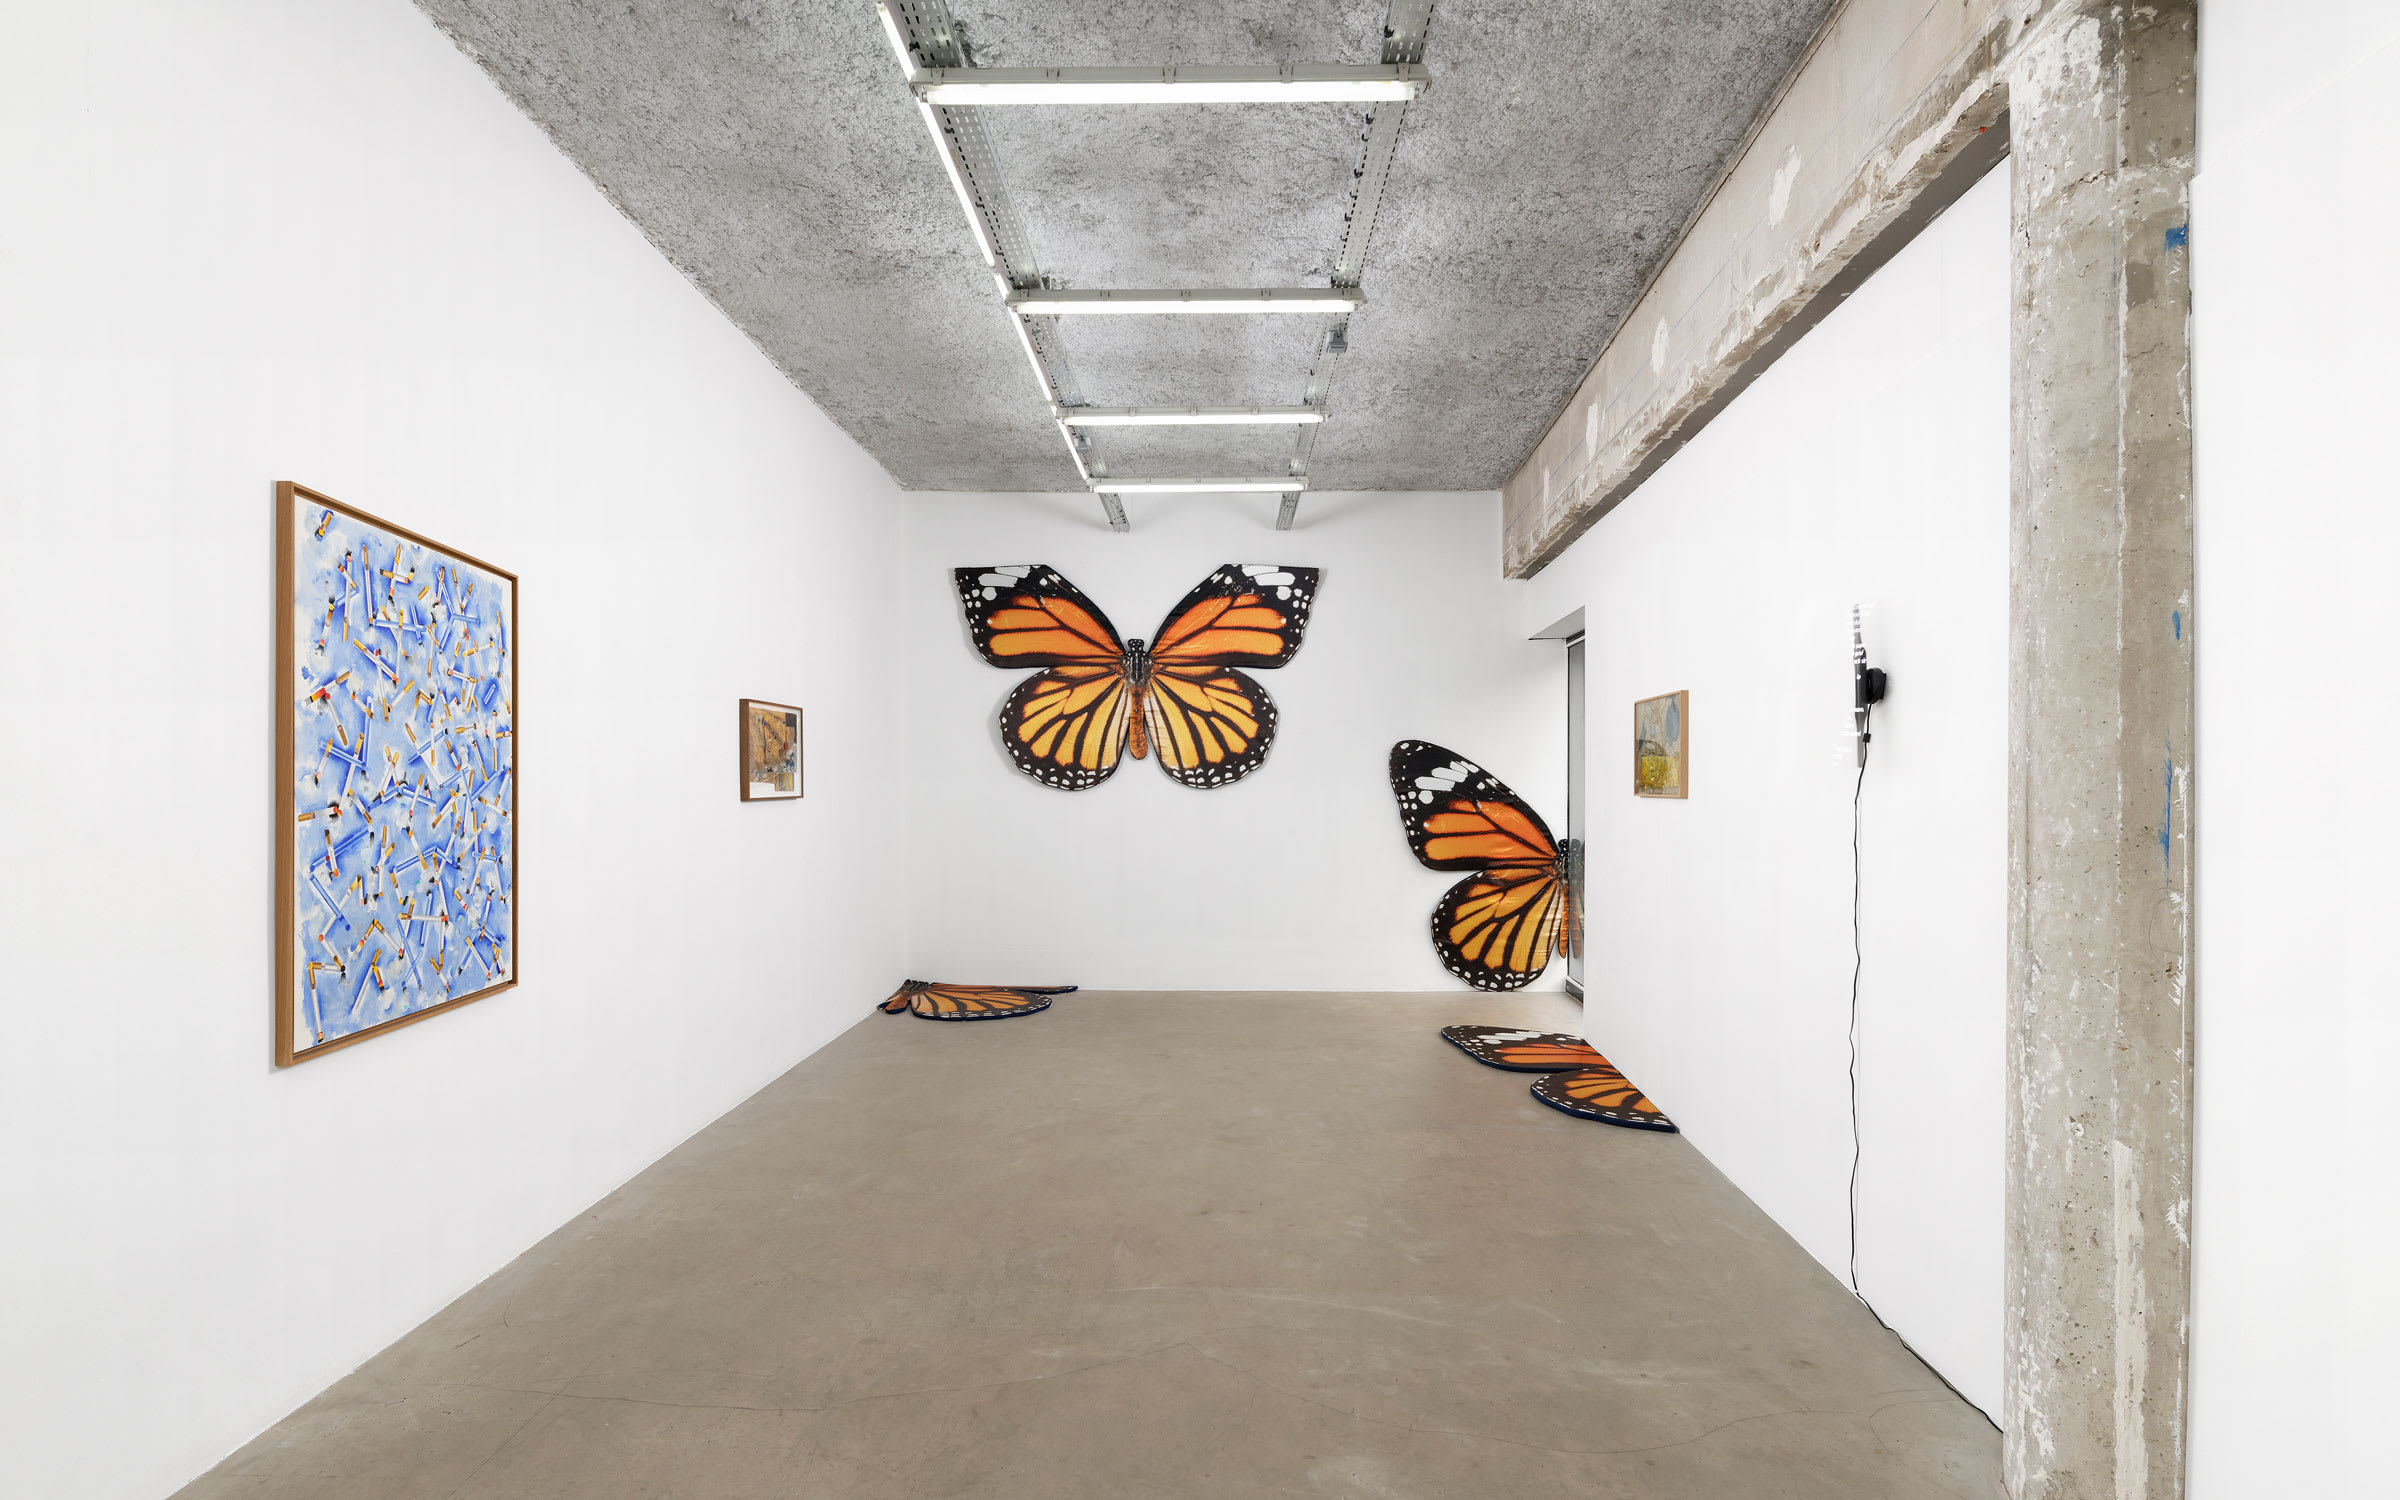 Installation view of 'Yesn’t', with works by David Caille, Candice Lin, Anthea Hamilton, Achraf Touloub, and Patrick Staff, Sultana, Paris, September 2020 © Aurélien Mole